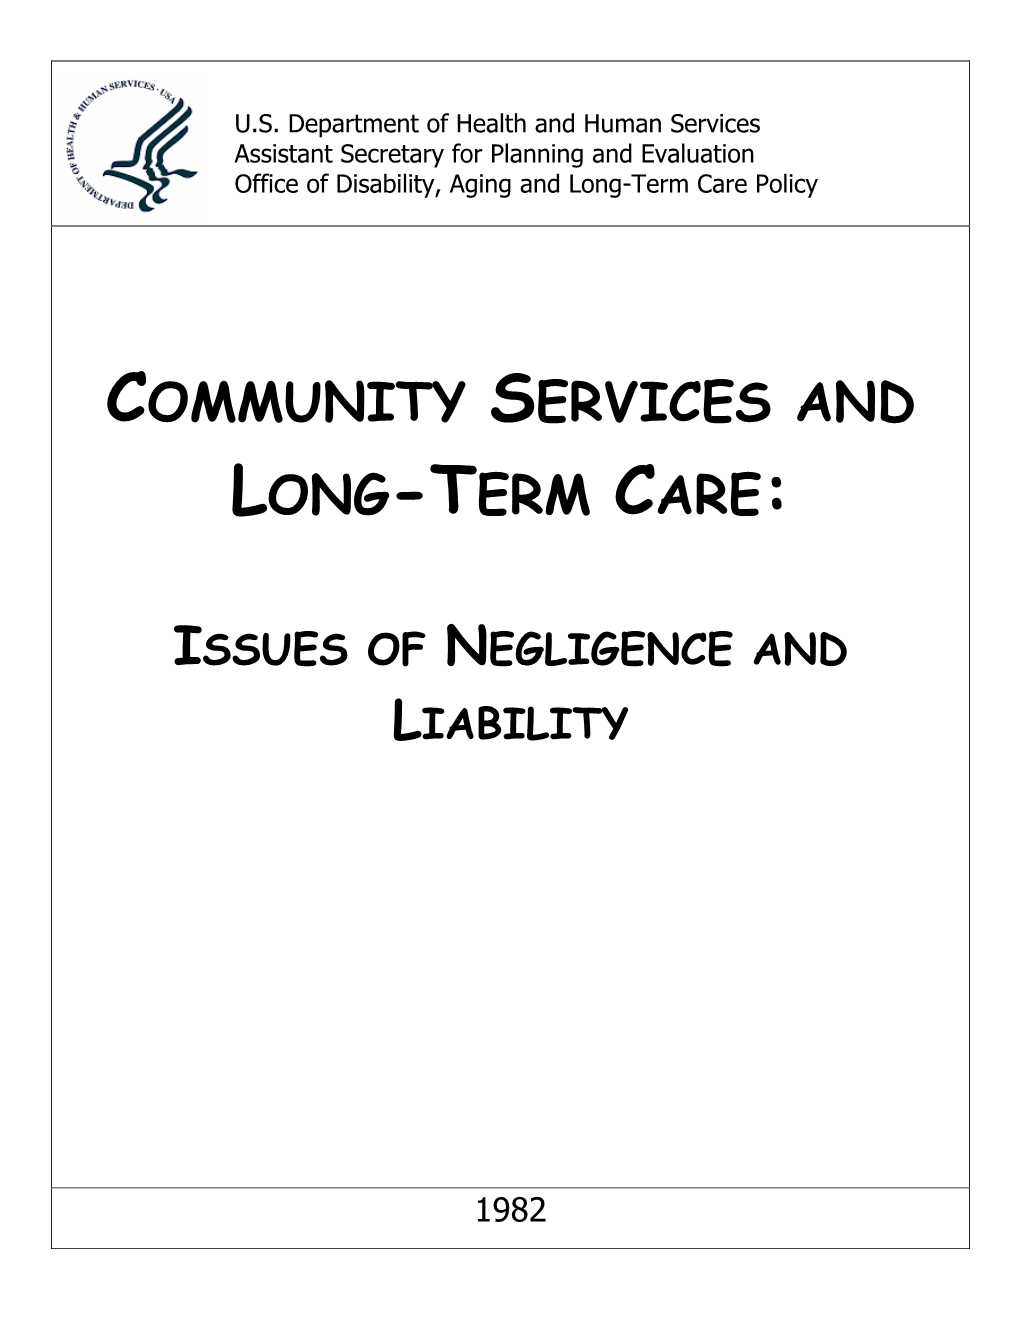 Community Services and Long-Term Care